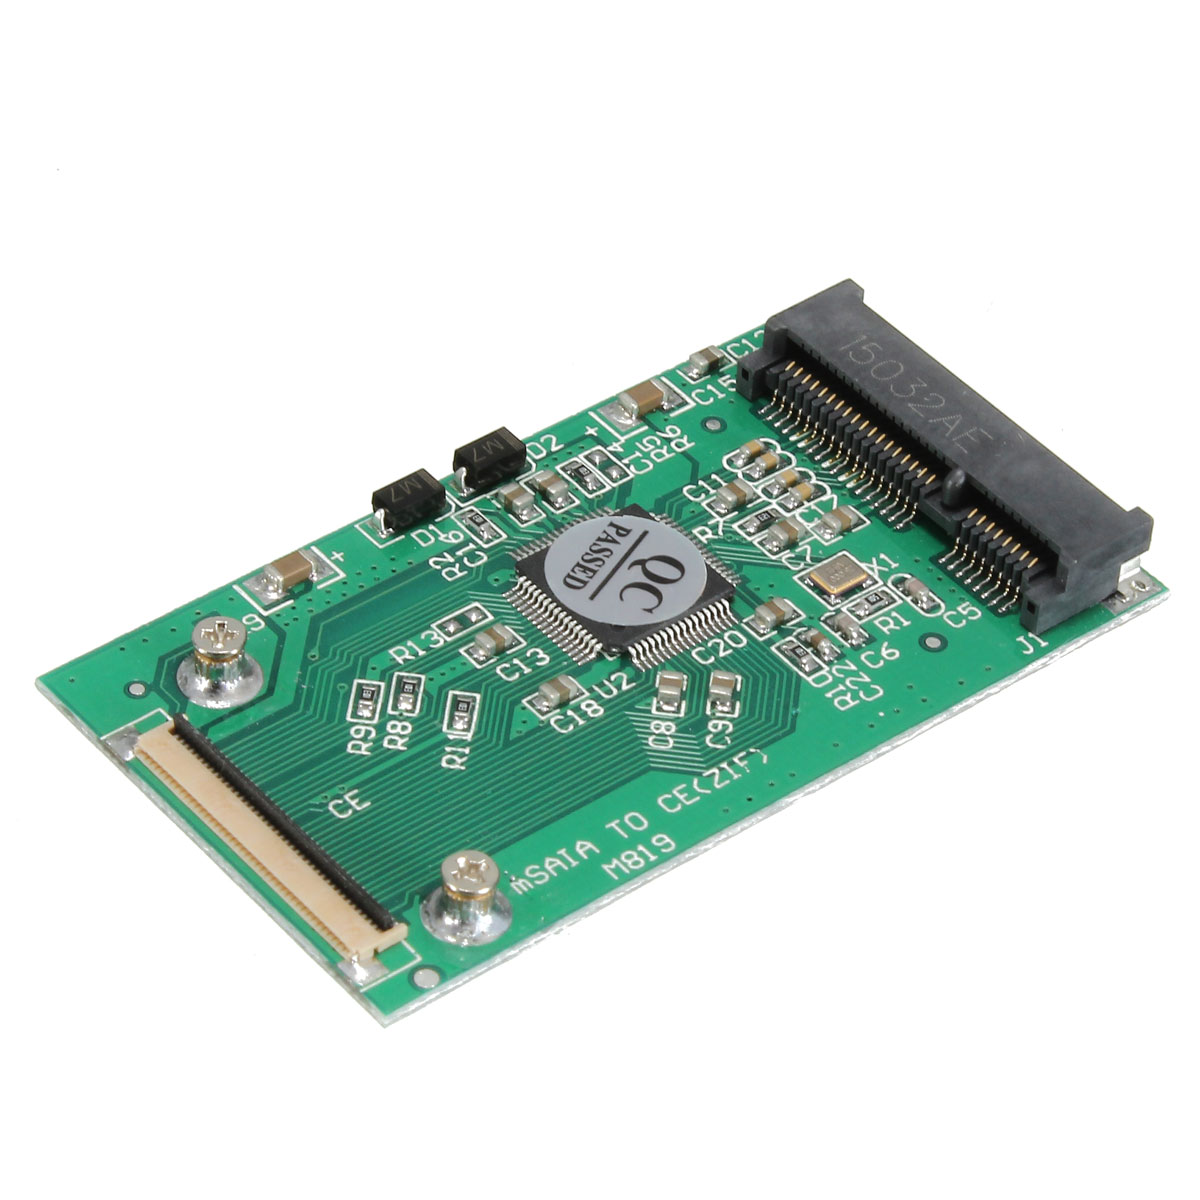 Find mSATA PCI E SSD To 40Pin ZIF CE Adapter Card Converter Card for 3 3V Mini PCI e SSD for Sale on Gipsybee.com with cryptocurrencies